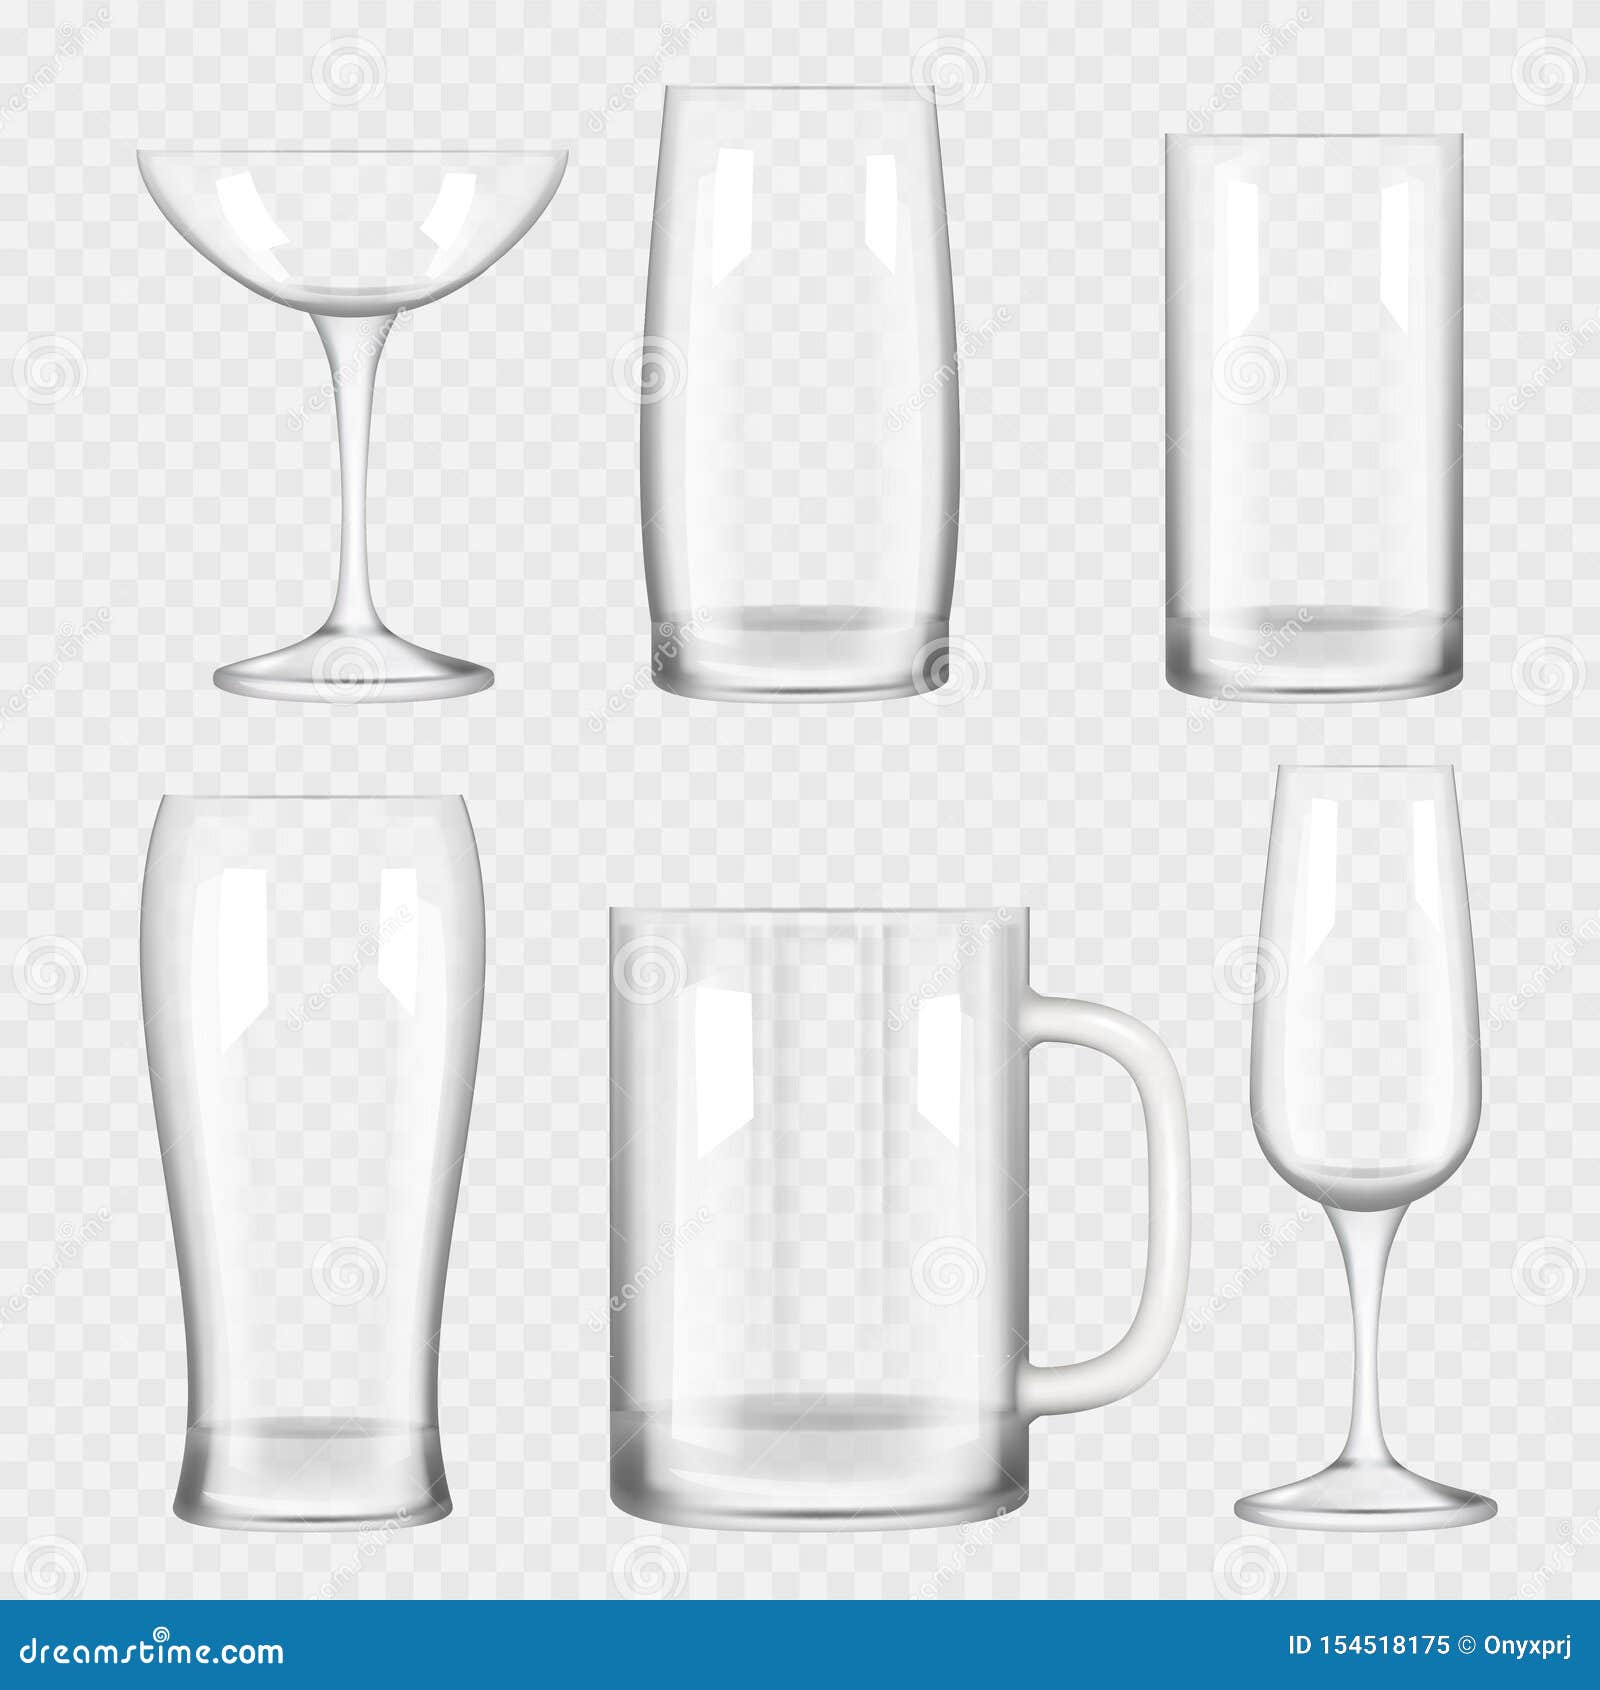 https://thumbs.dreamstime.com/z/transparent-glass-cup-empty-champagne-cocktail-bar-drinks-realistic-collection-vector-illustration-alcohol-drink-restaurant-154518175.jpg